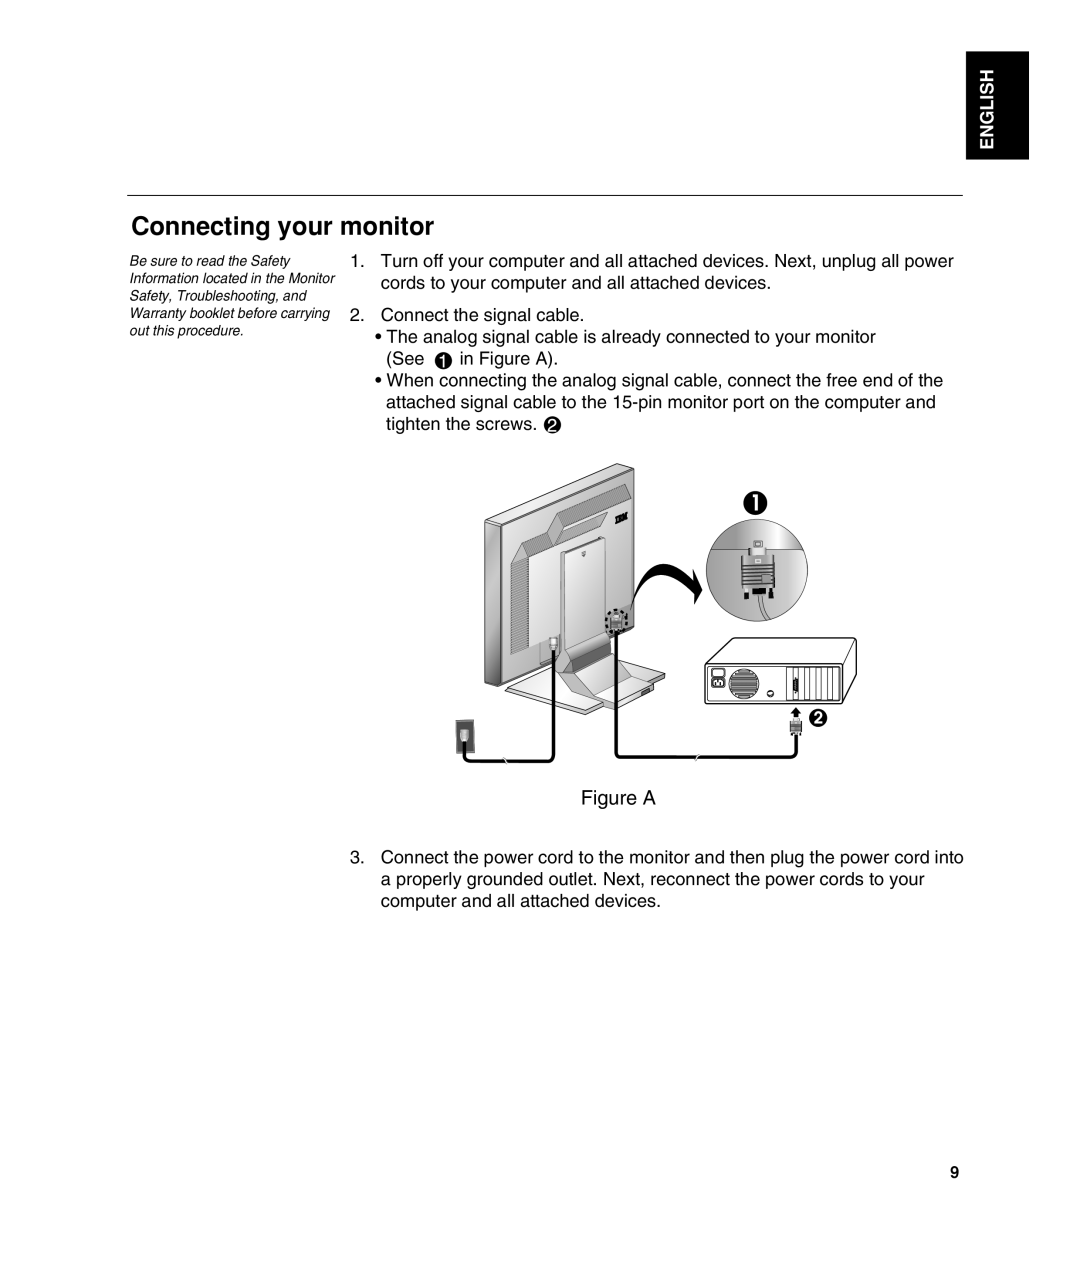 Lenovo L190 manual Connecting your monitor, Figure A, English 